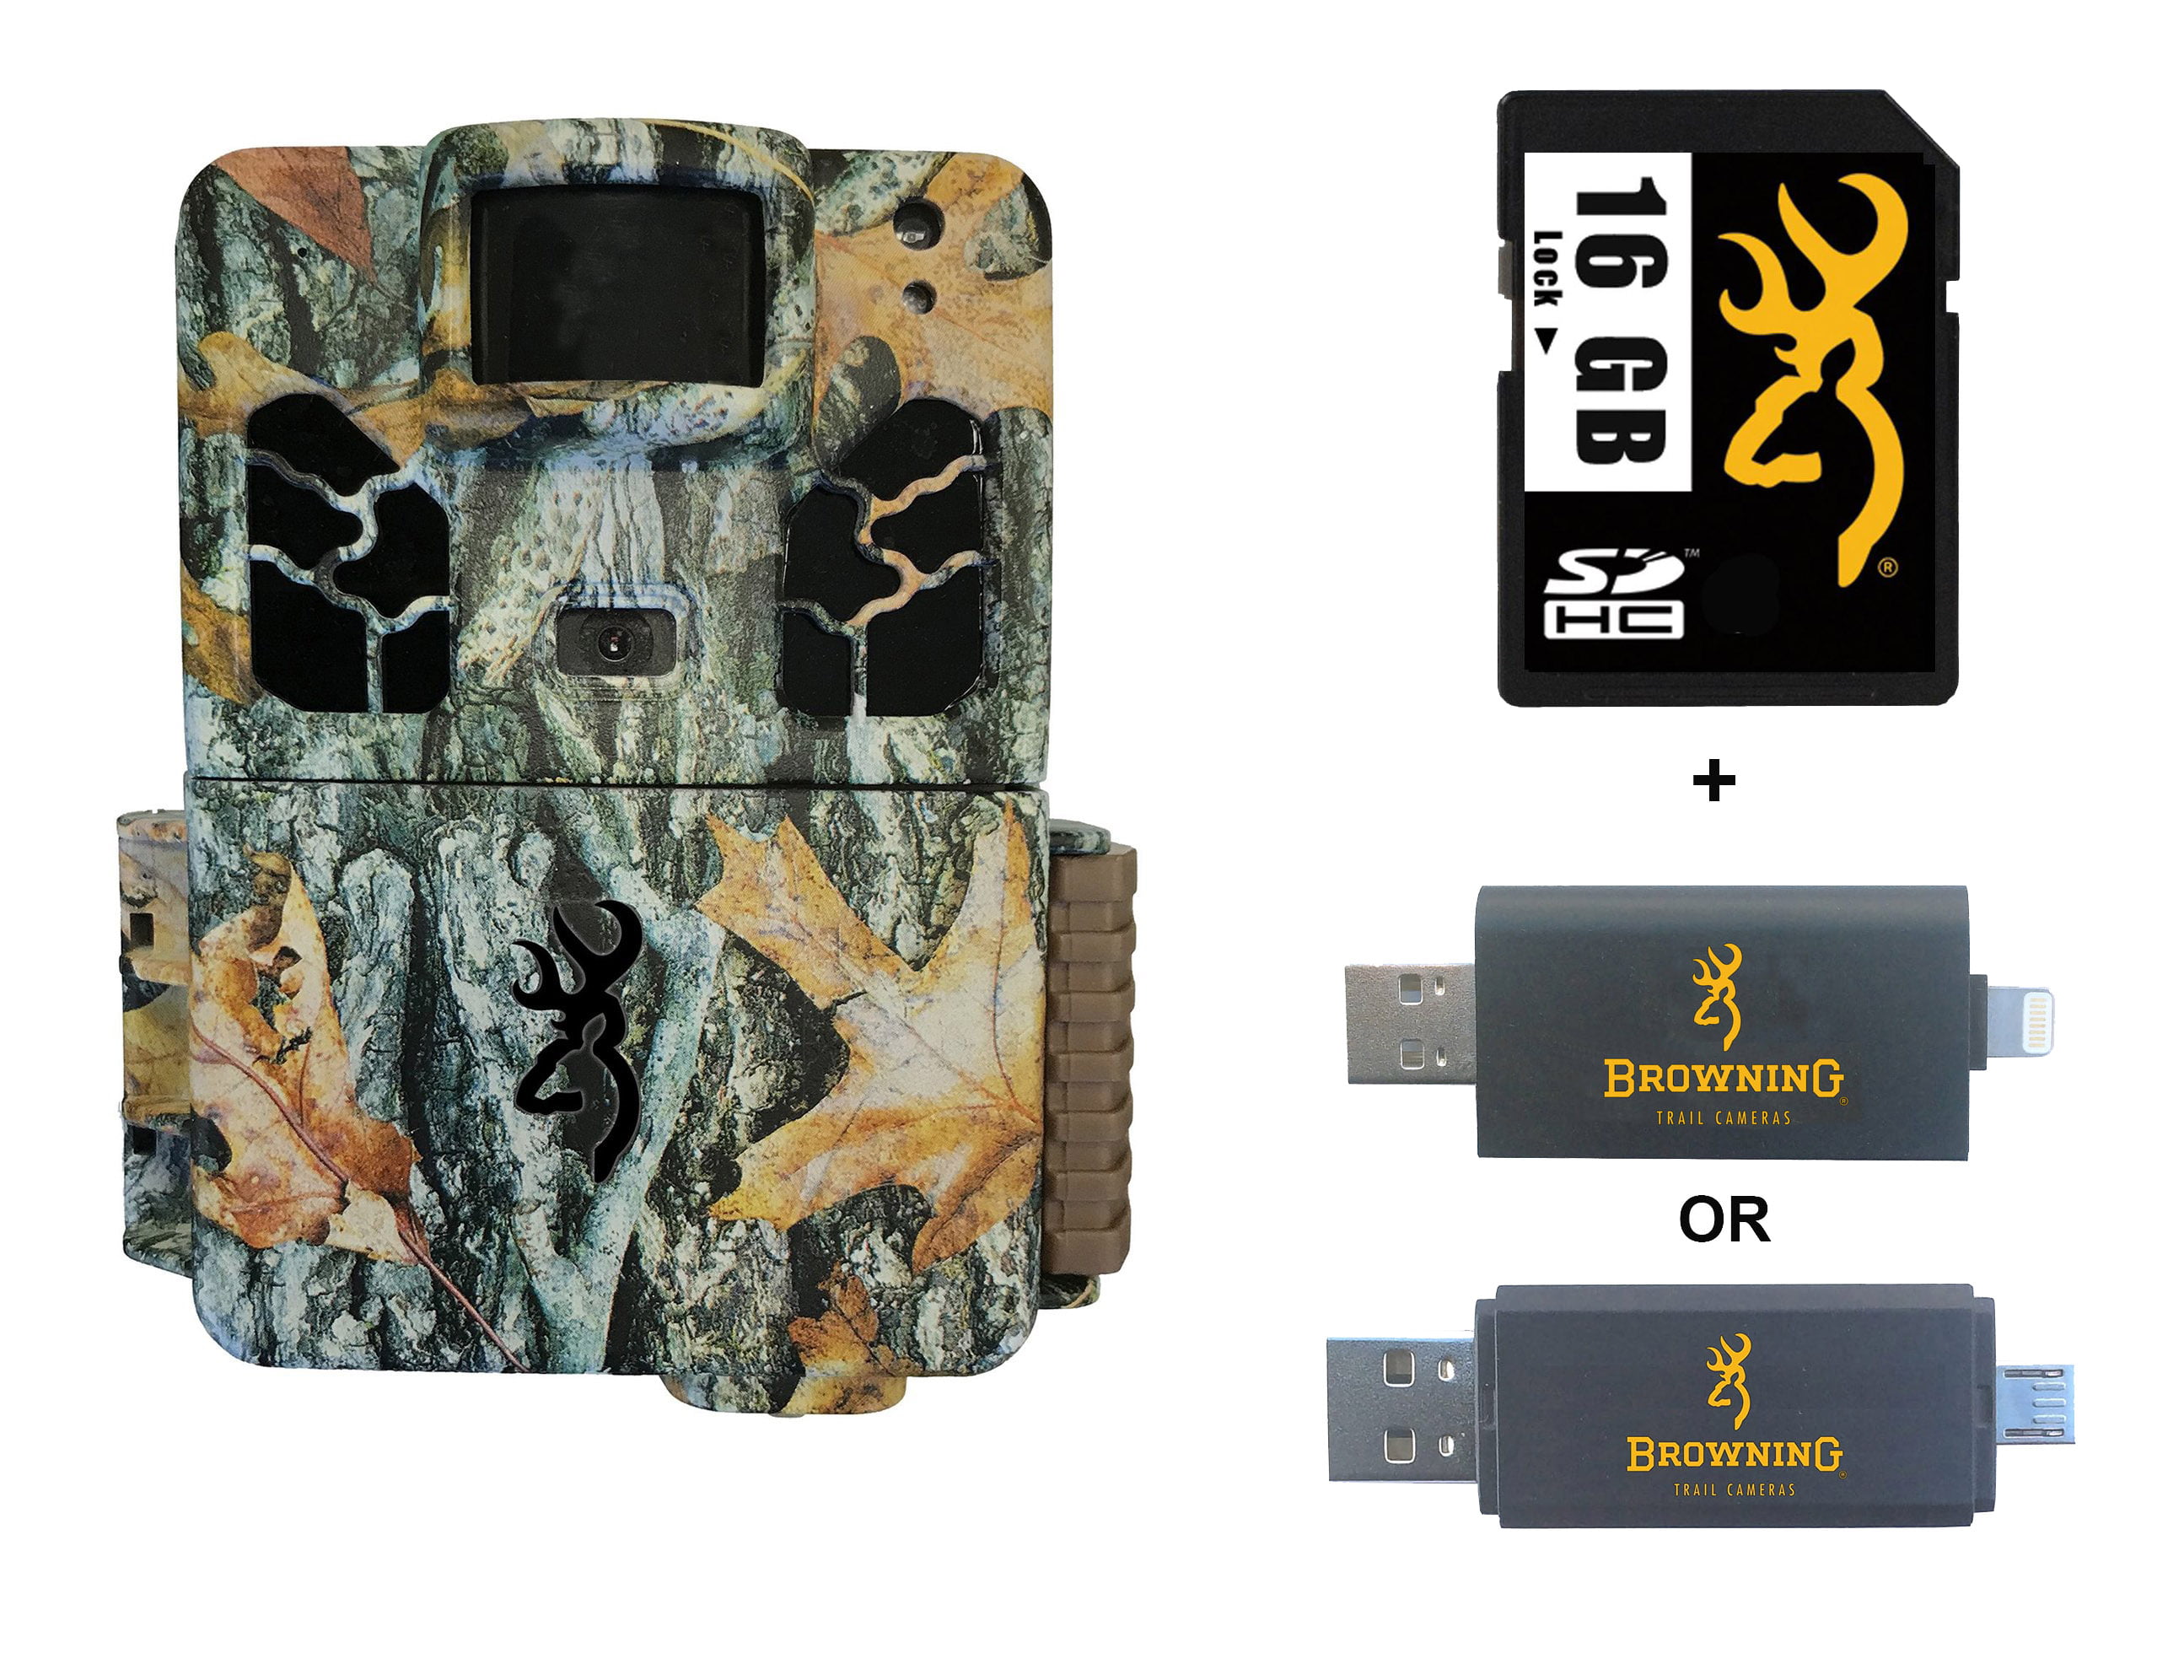 BTC6HDMAX Browning Dark Ops HD MAX Trail Game Camera Bundle Includes 32GB Memory Card and J-TECH Card Reader 18MP 